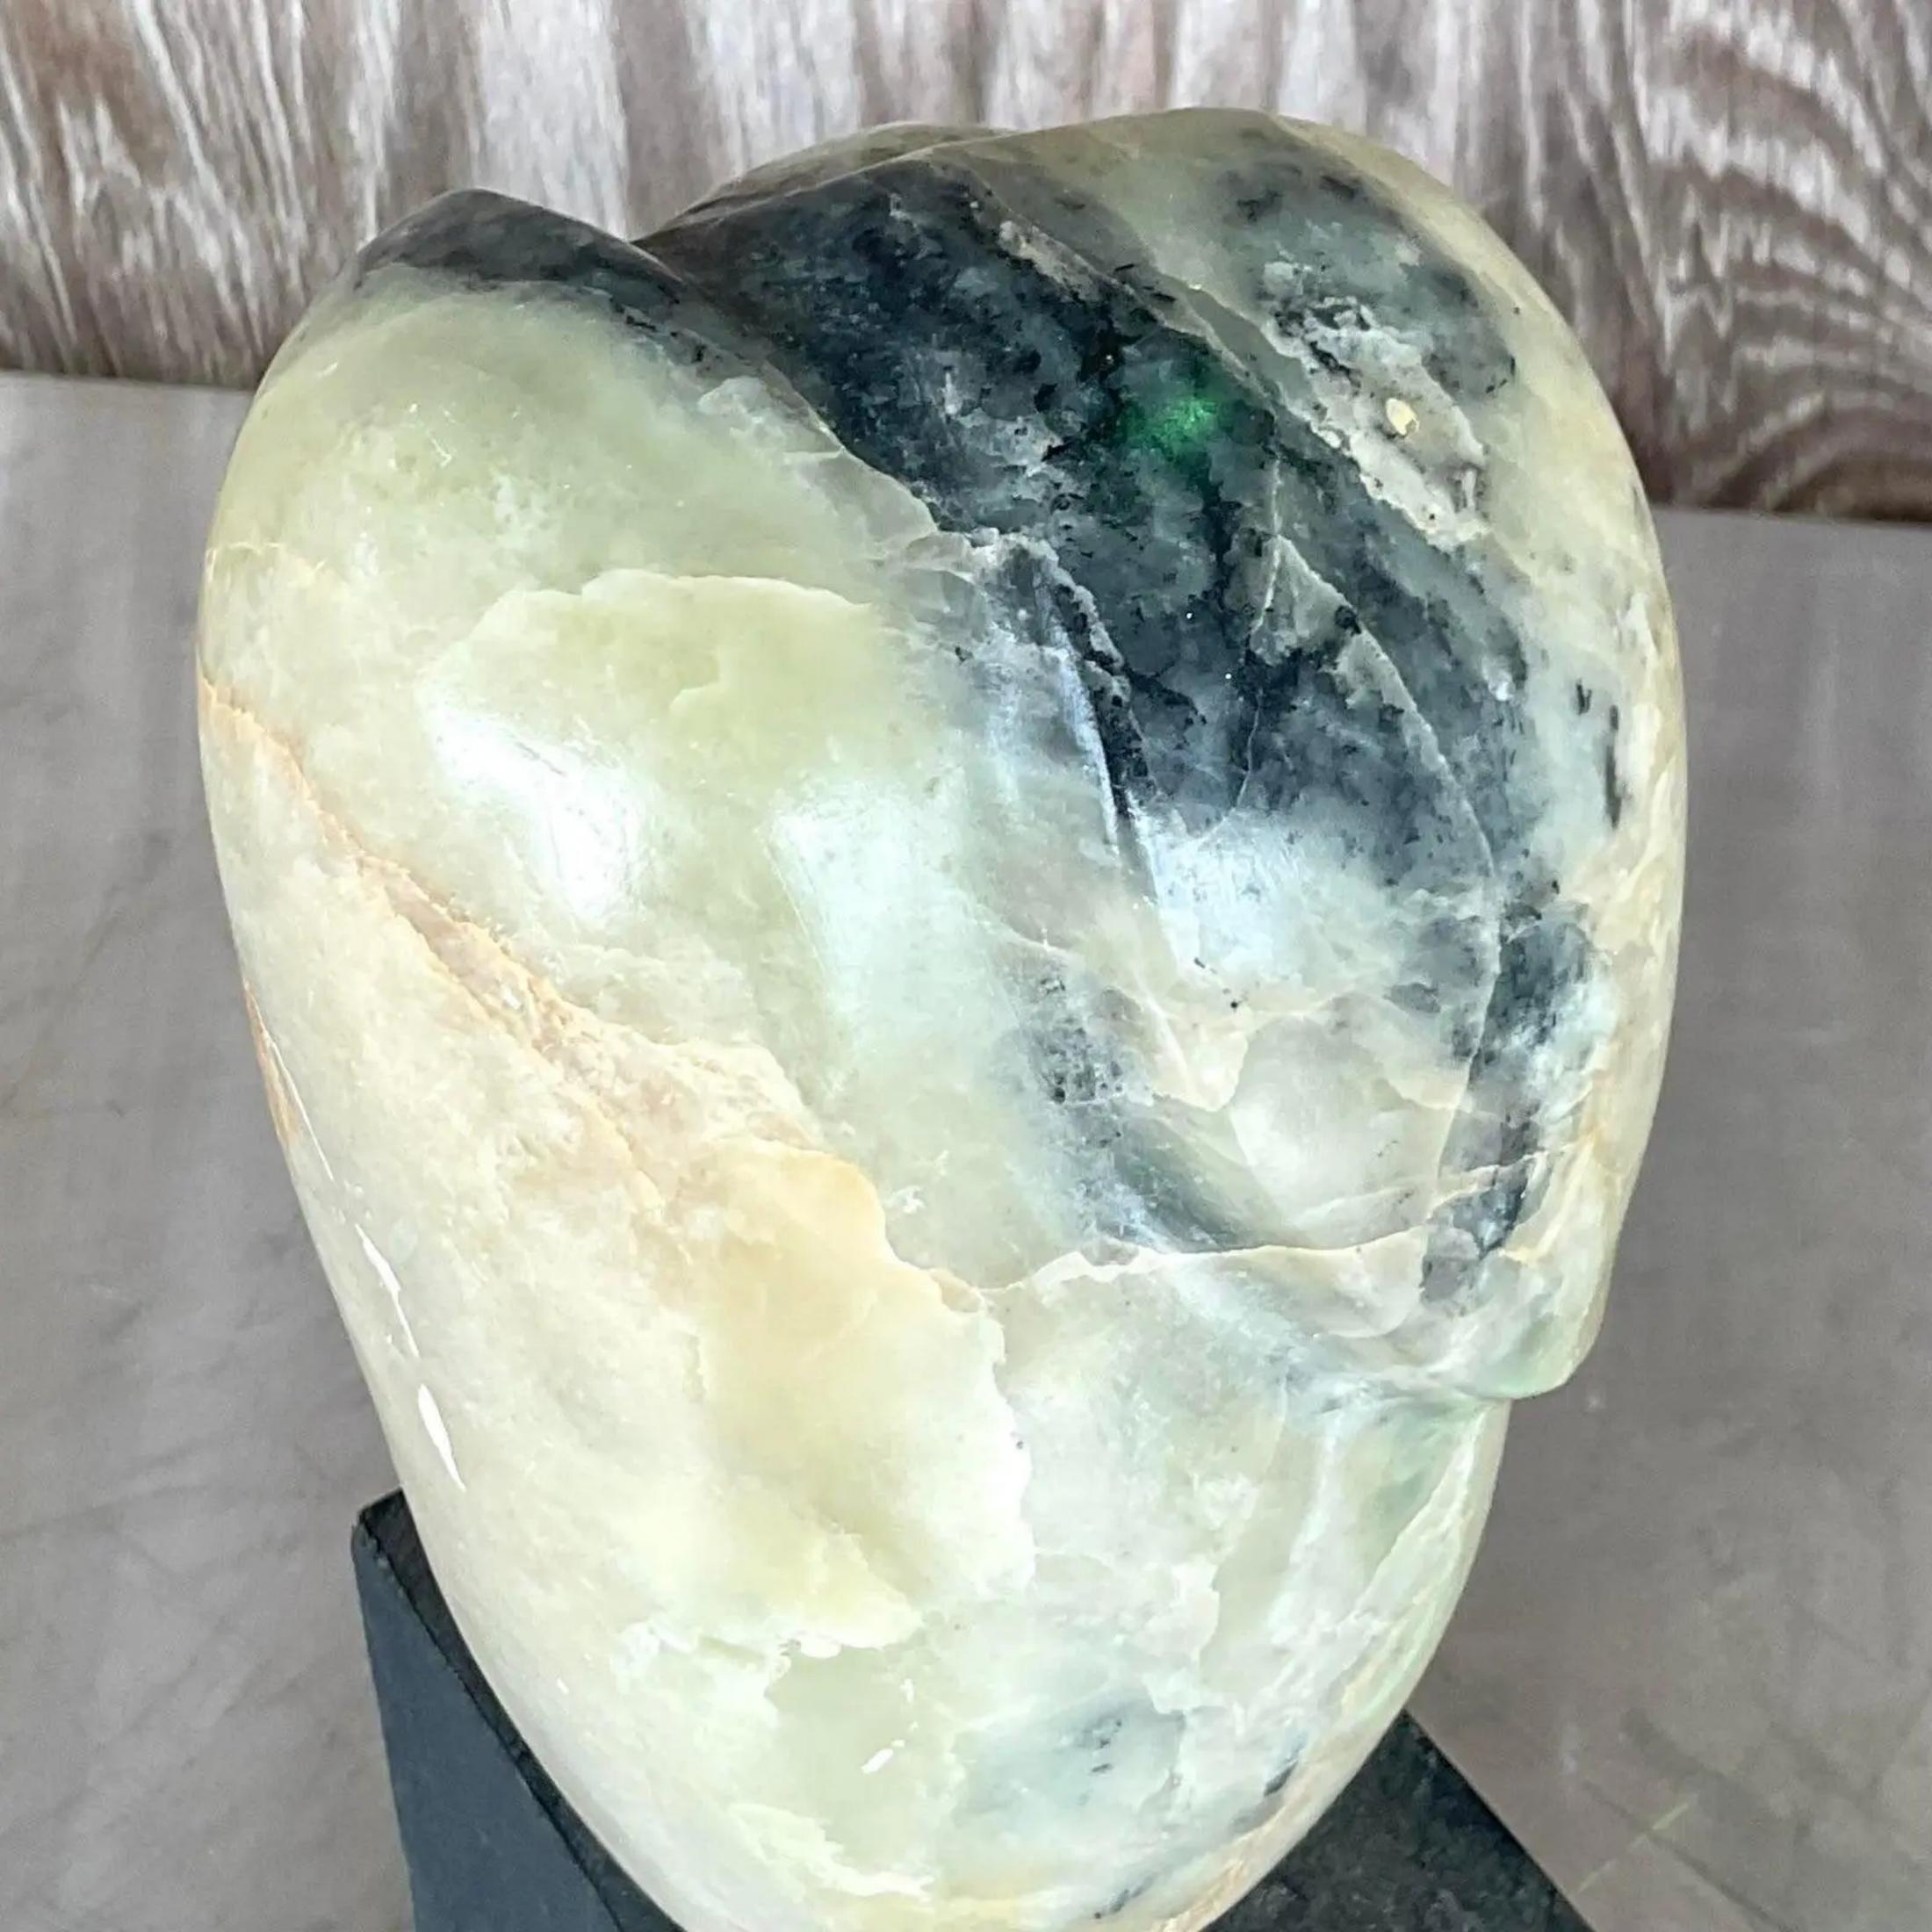 Fantastic vintage Boho Sculpture. Beautiful hand carved stone in striking pale greens and black. Rests on a black painted wood block. Acquired from a Palm Beach estate